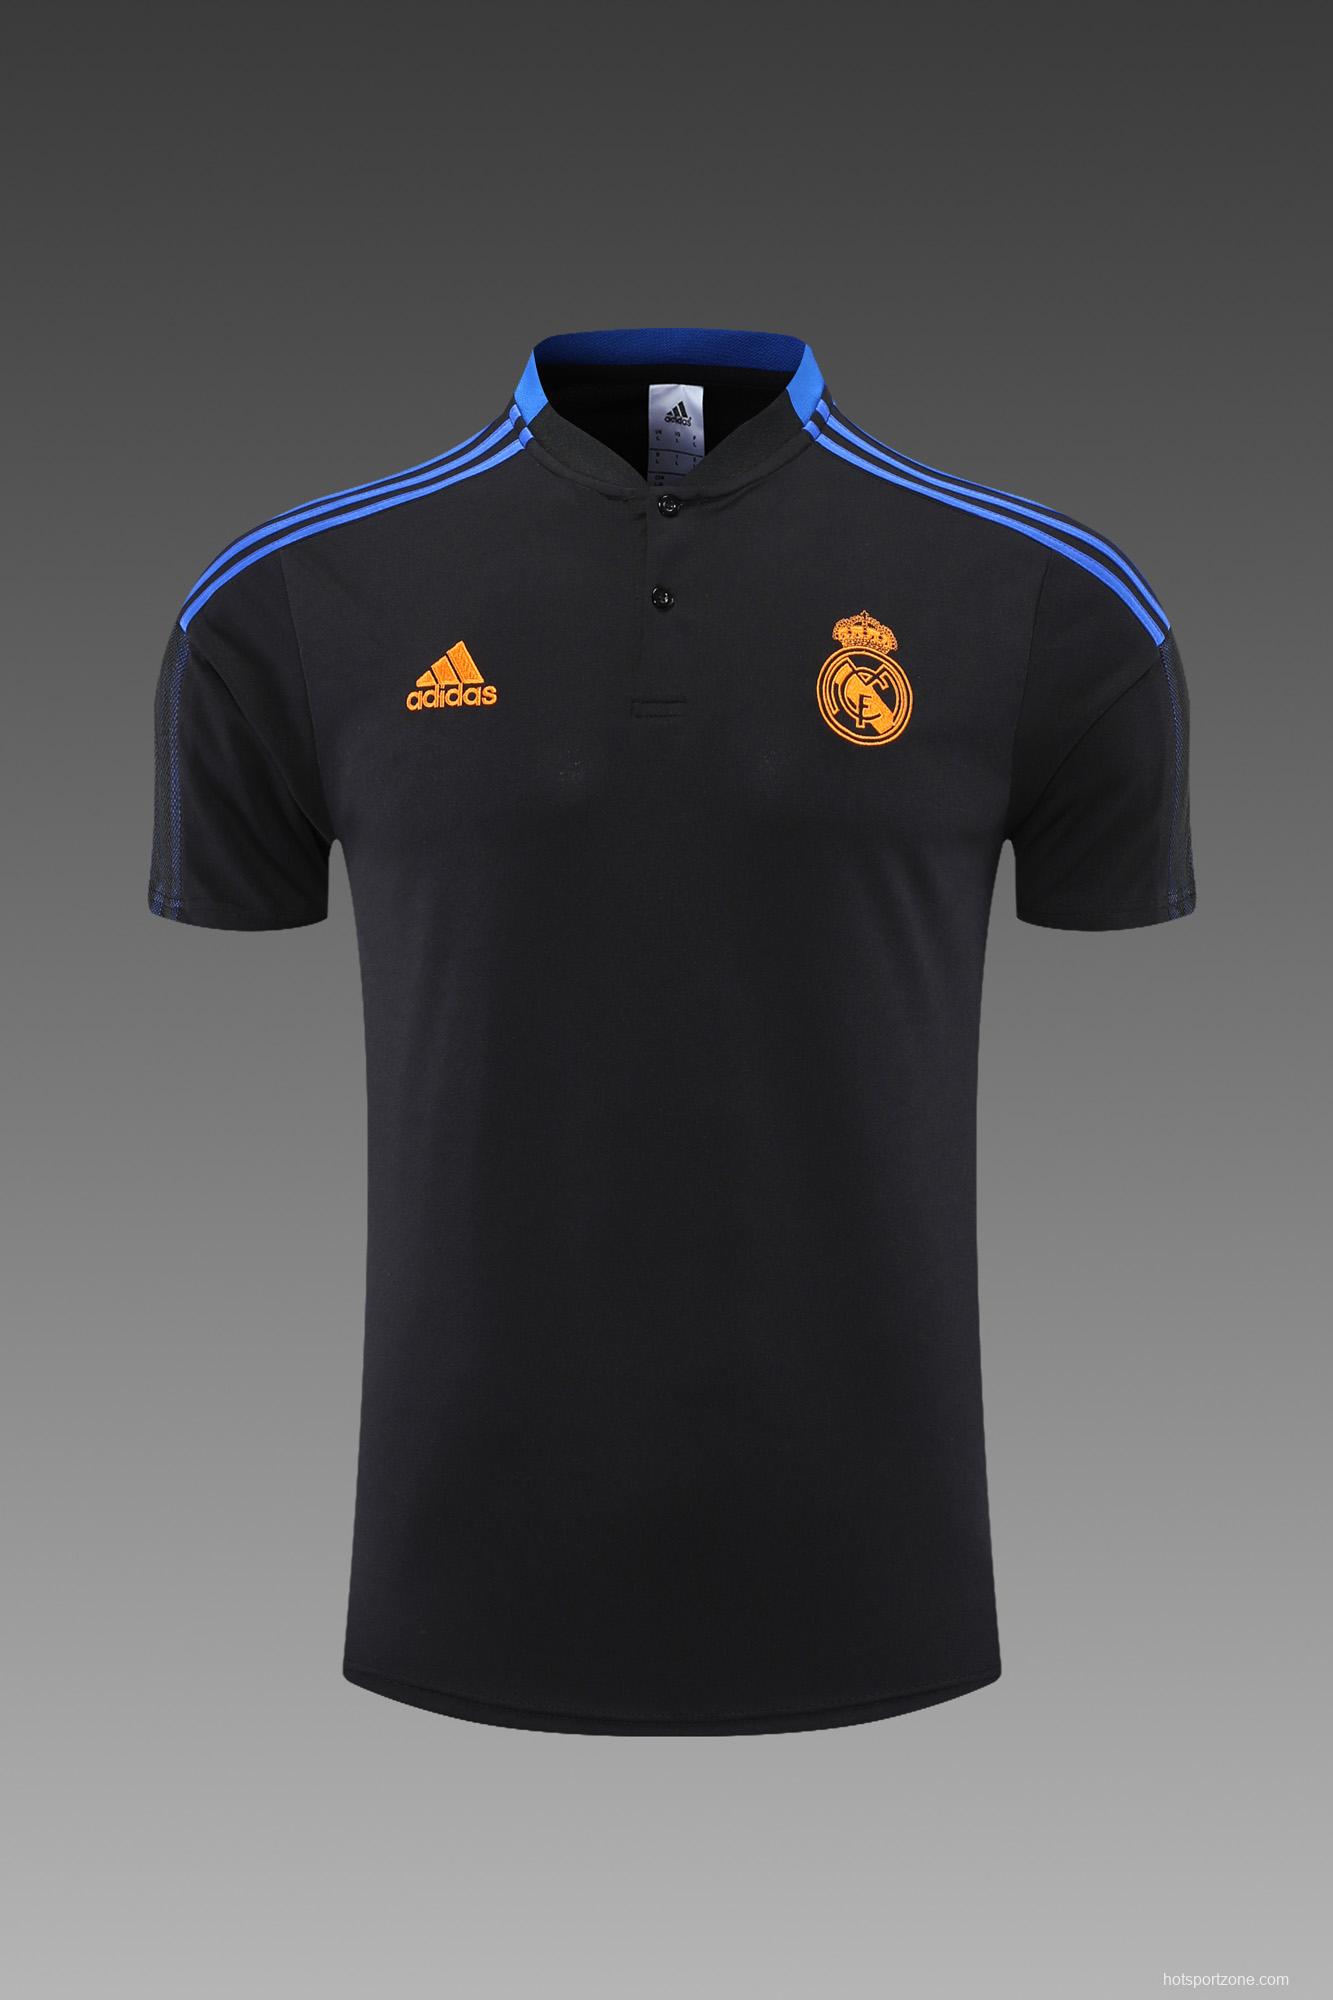 Real Madrid POLO kit black and blue stripes (not supported to be sold separately)